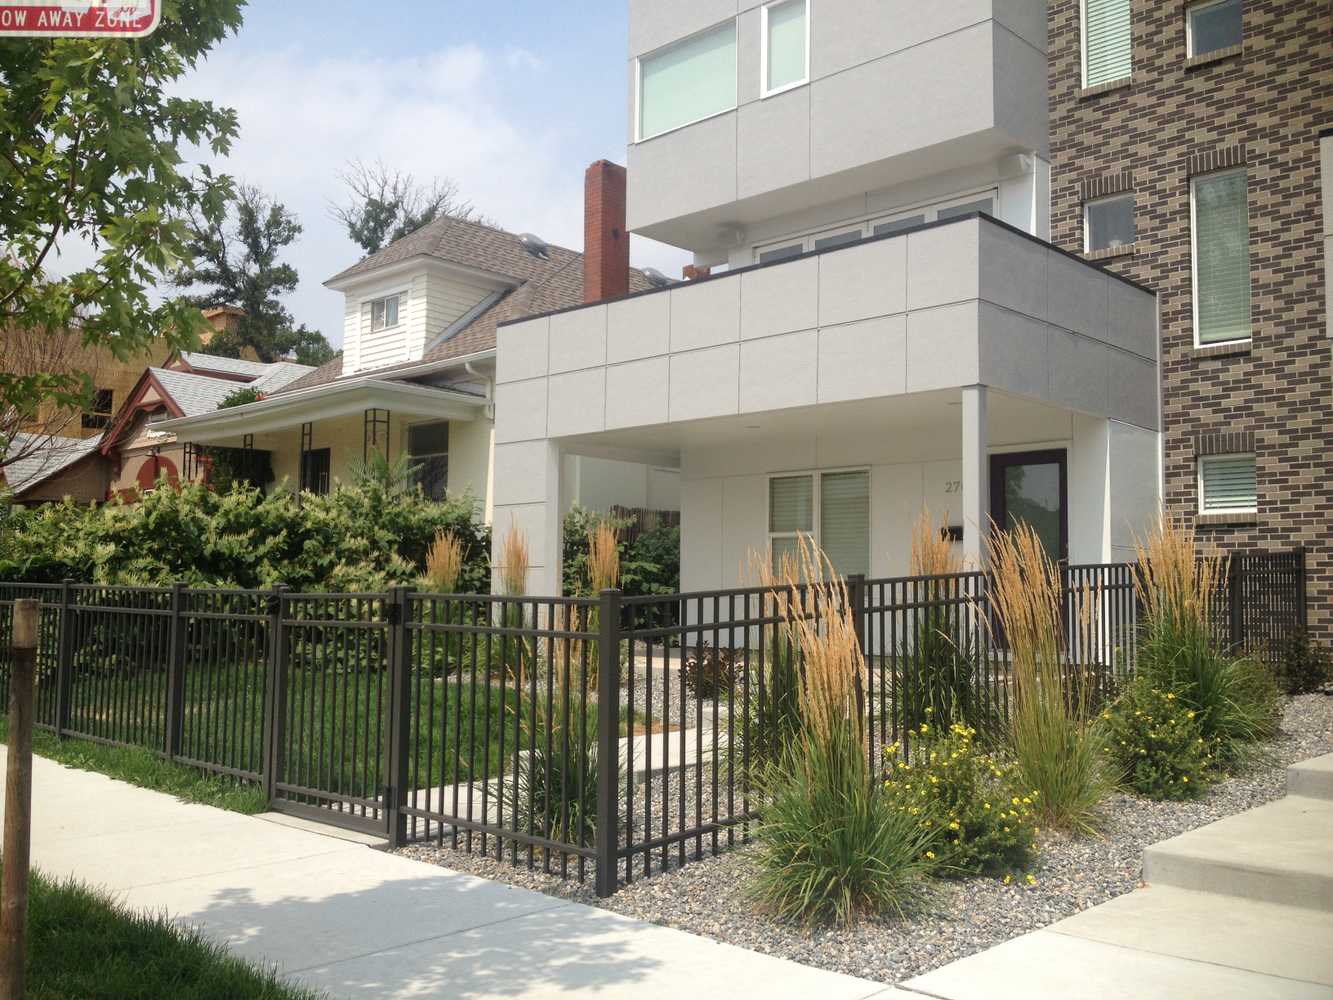 RESIDENTIAL Photo(s) from Denver Fence Construction And Repair